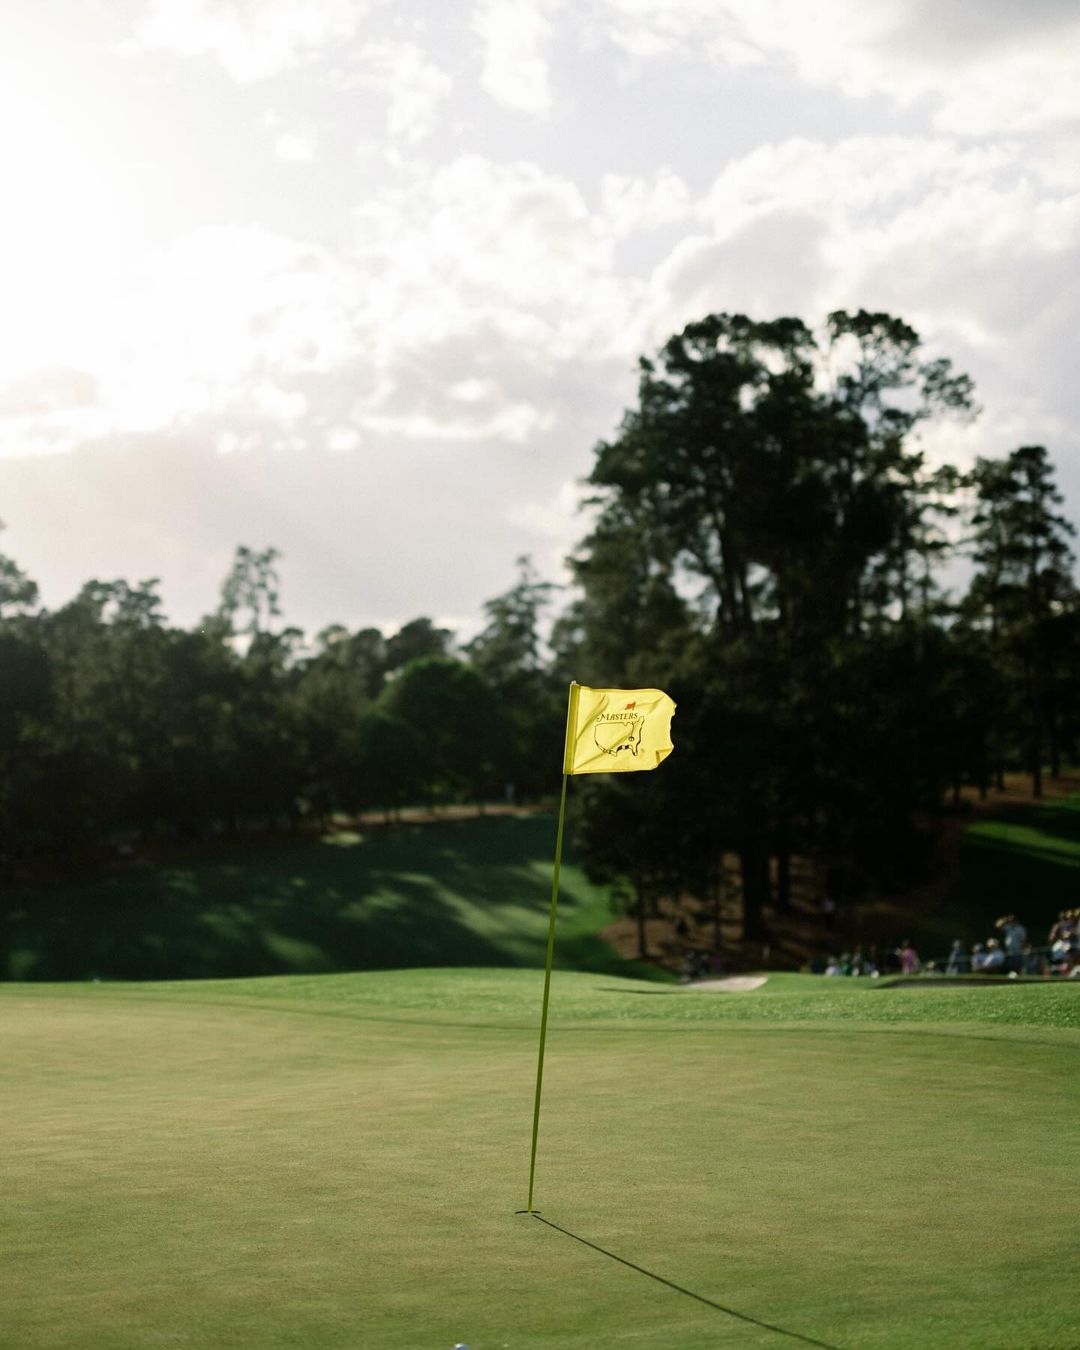 The Aussies looking to make their mark at the Masters golf tournament this weekend